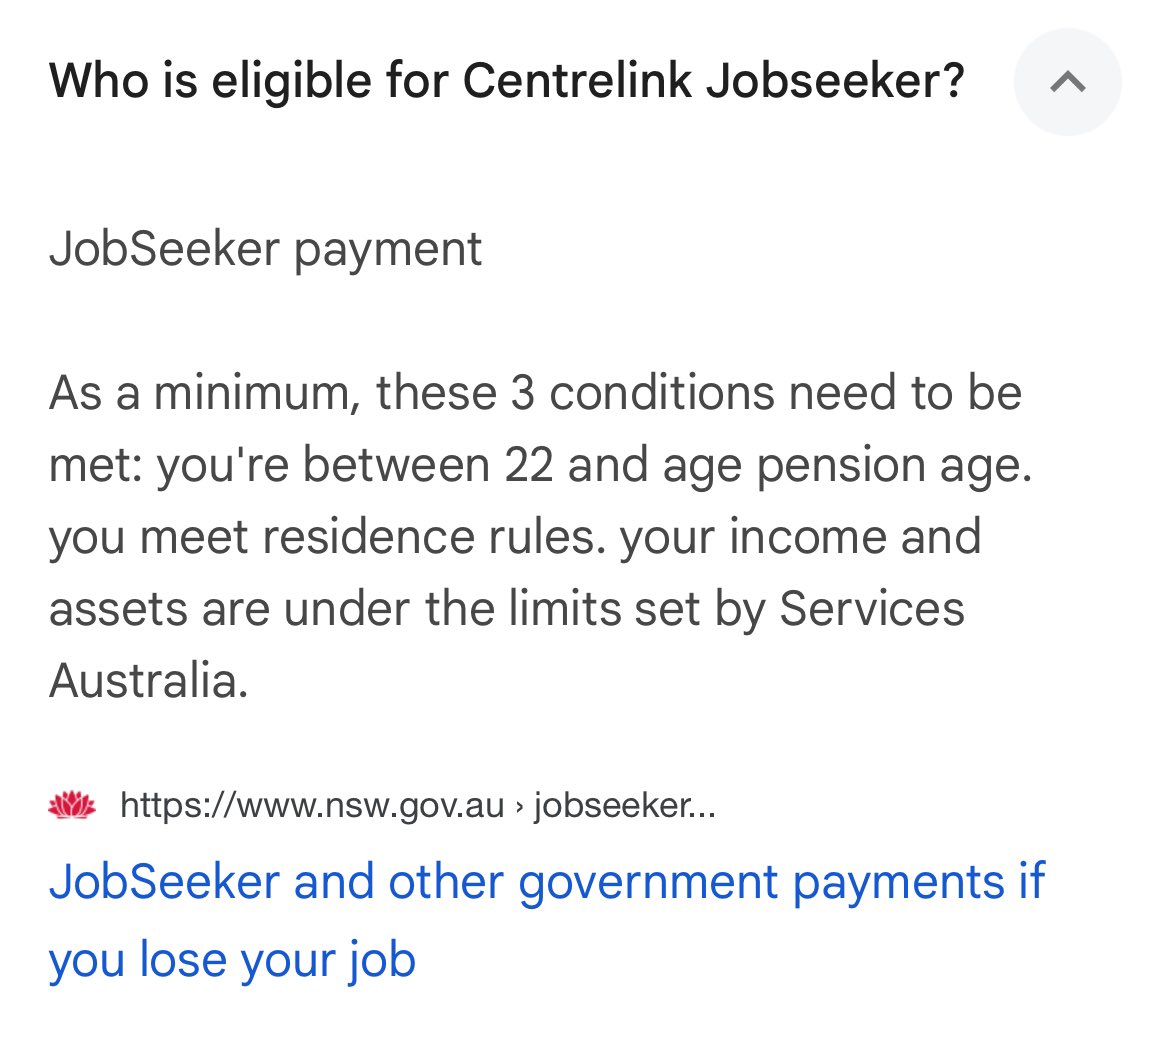 ELIGIBILITY for #JobSeeker is if you’re over 22 and you not old enough for the Aged Pension. If you’re looking for work or too sick to work (other reasonable reasons are ignored here) it must be either a medical exemption or you’re looking for work - to get paid. #auspol